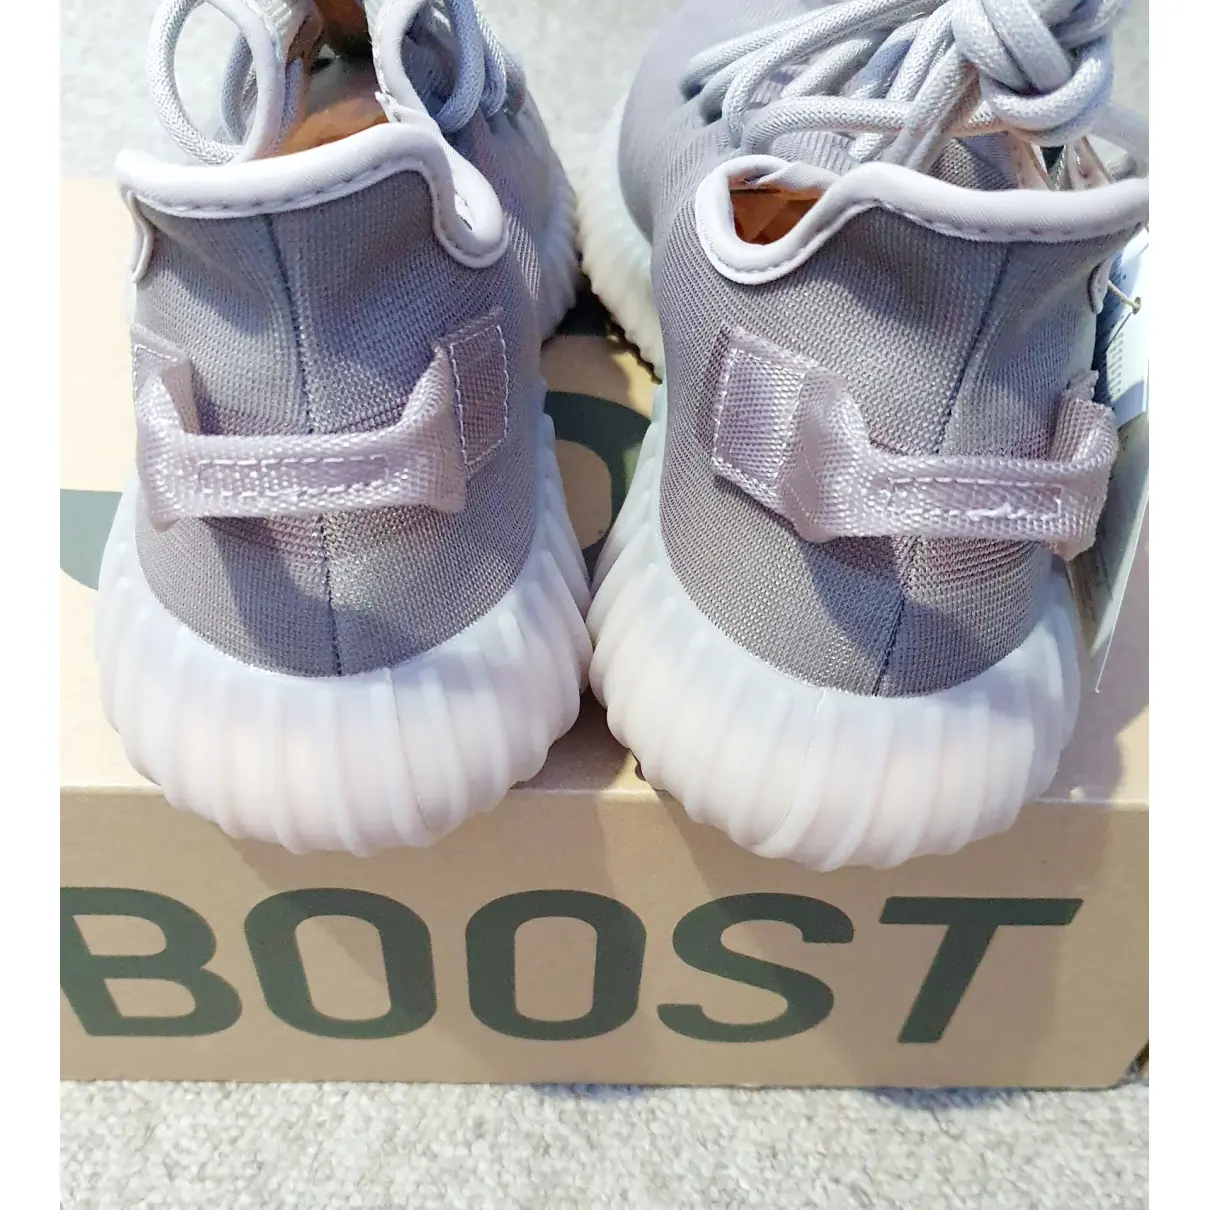 Buy Yeezy x Adidas Boost 350 V2 low trainers online